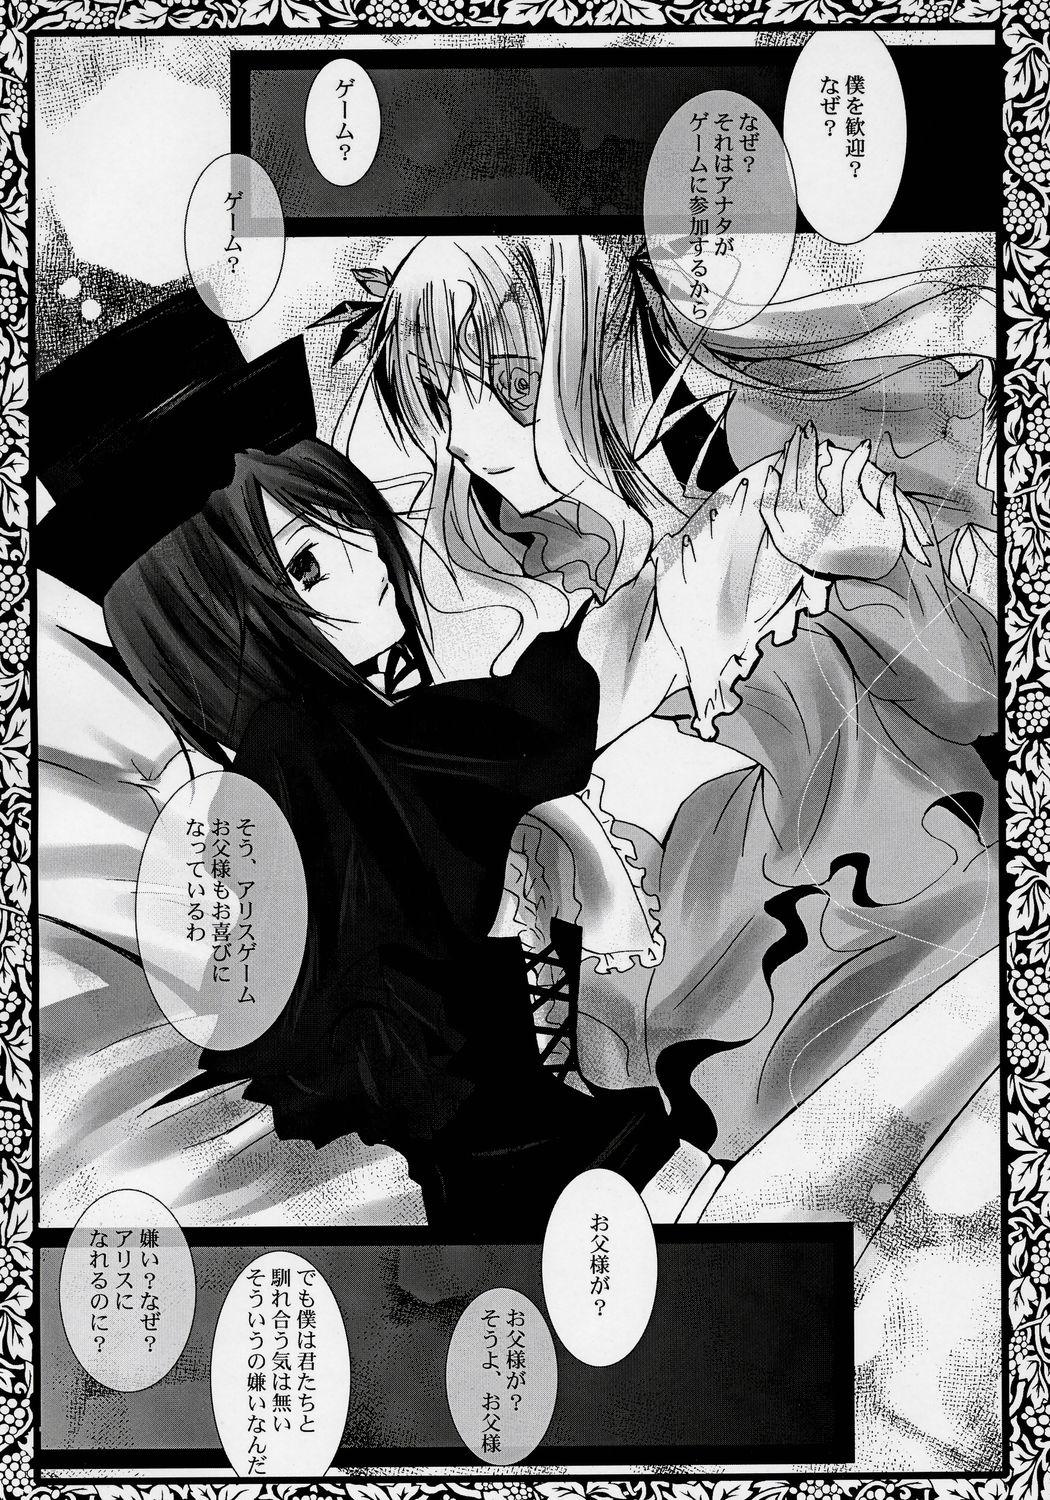 Couch Pupa Lapis - Rozen maiden Glamcore - Page 6